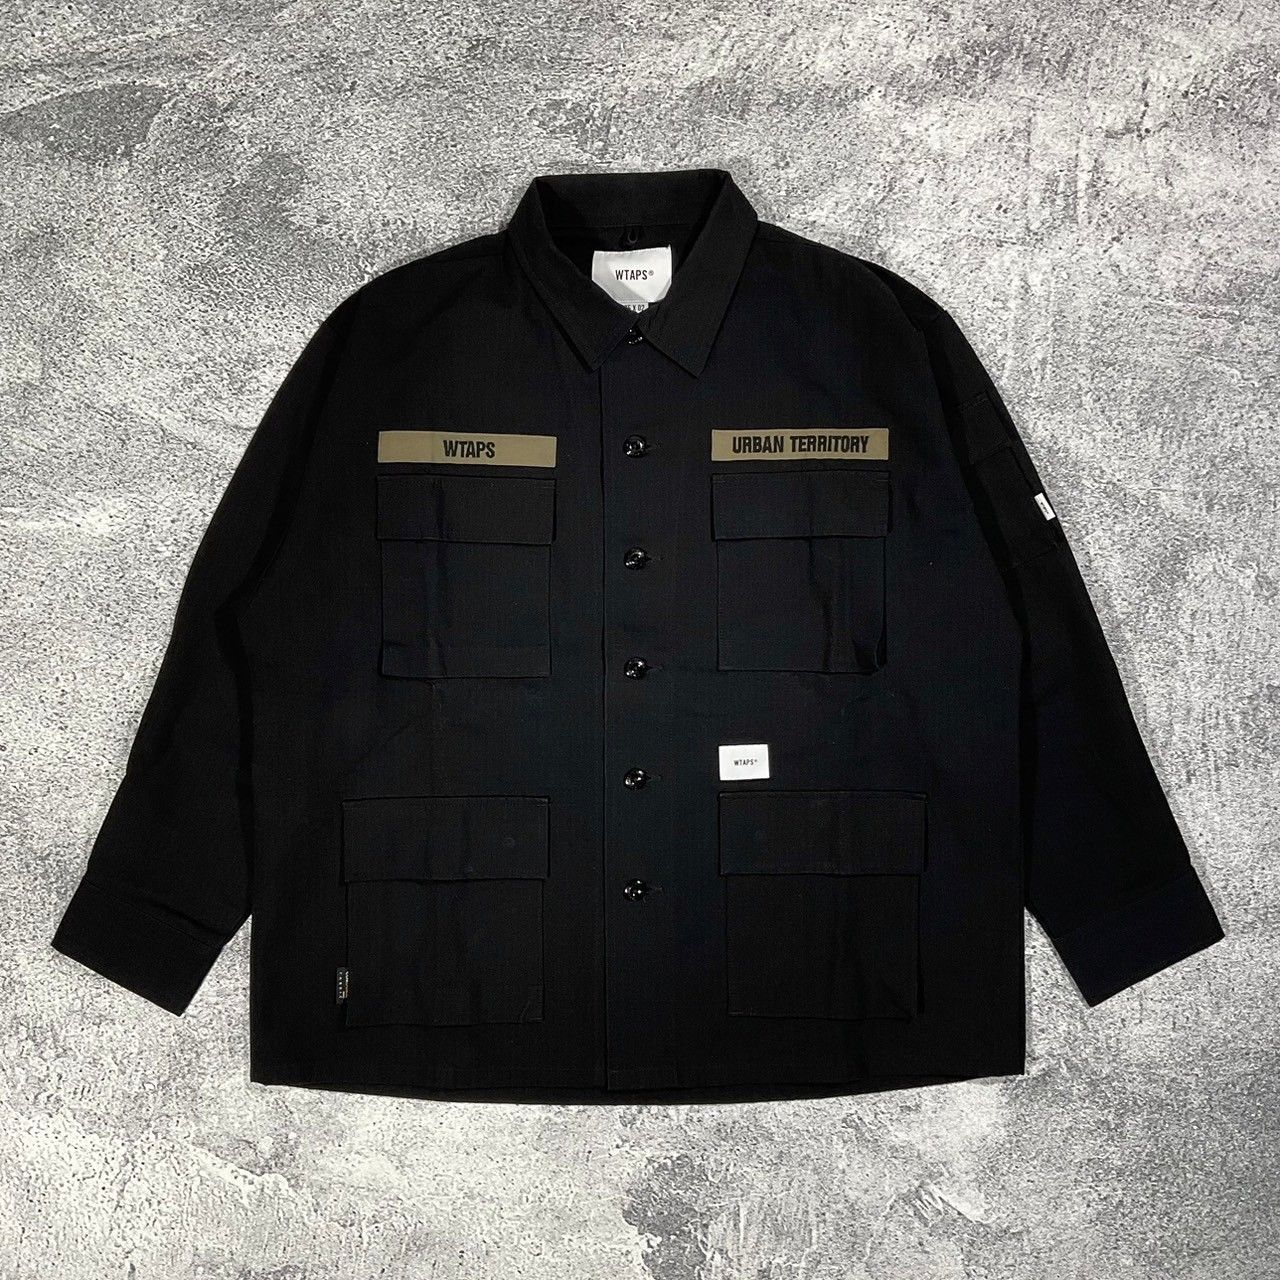 Wtaps WTAPS JUNGLE LS NYCO/ RIPSTOP 2020 EX41_COLLECTION | Grailed